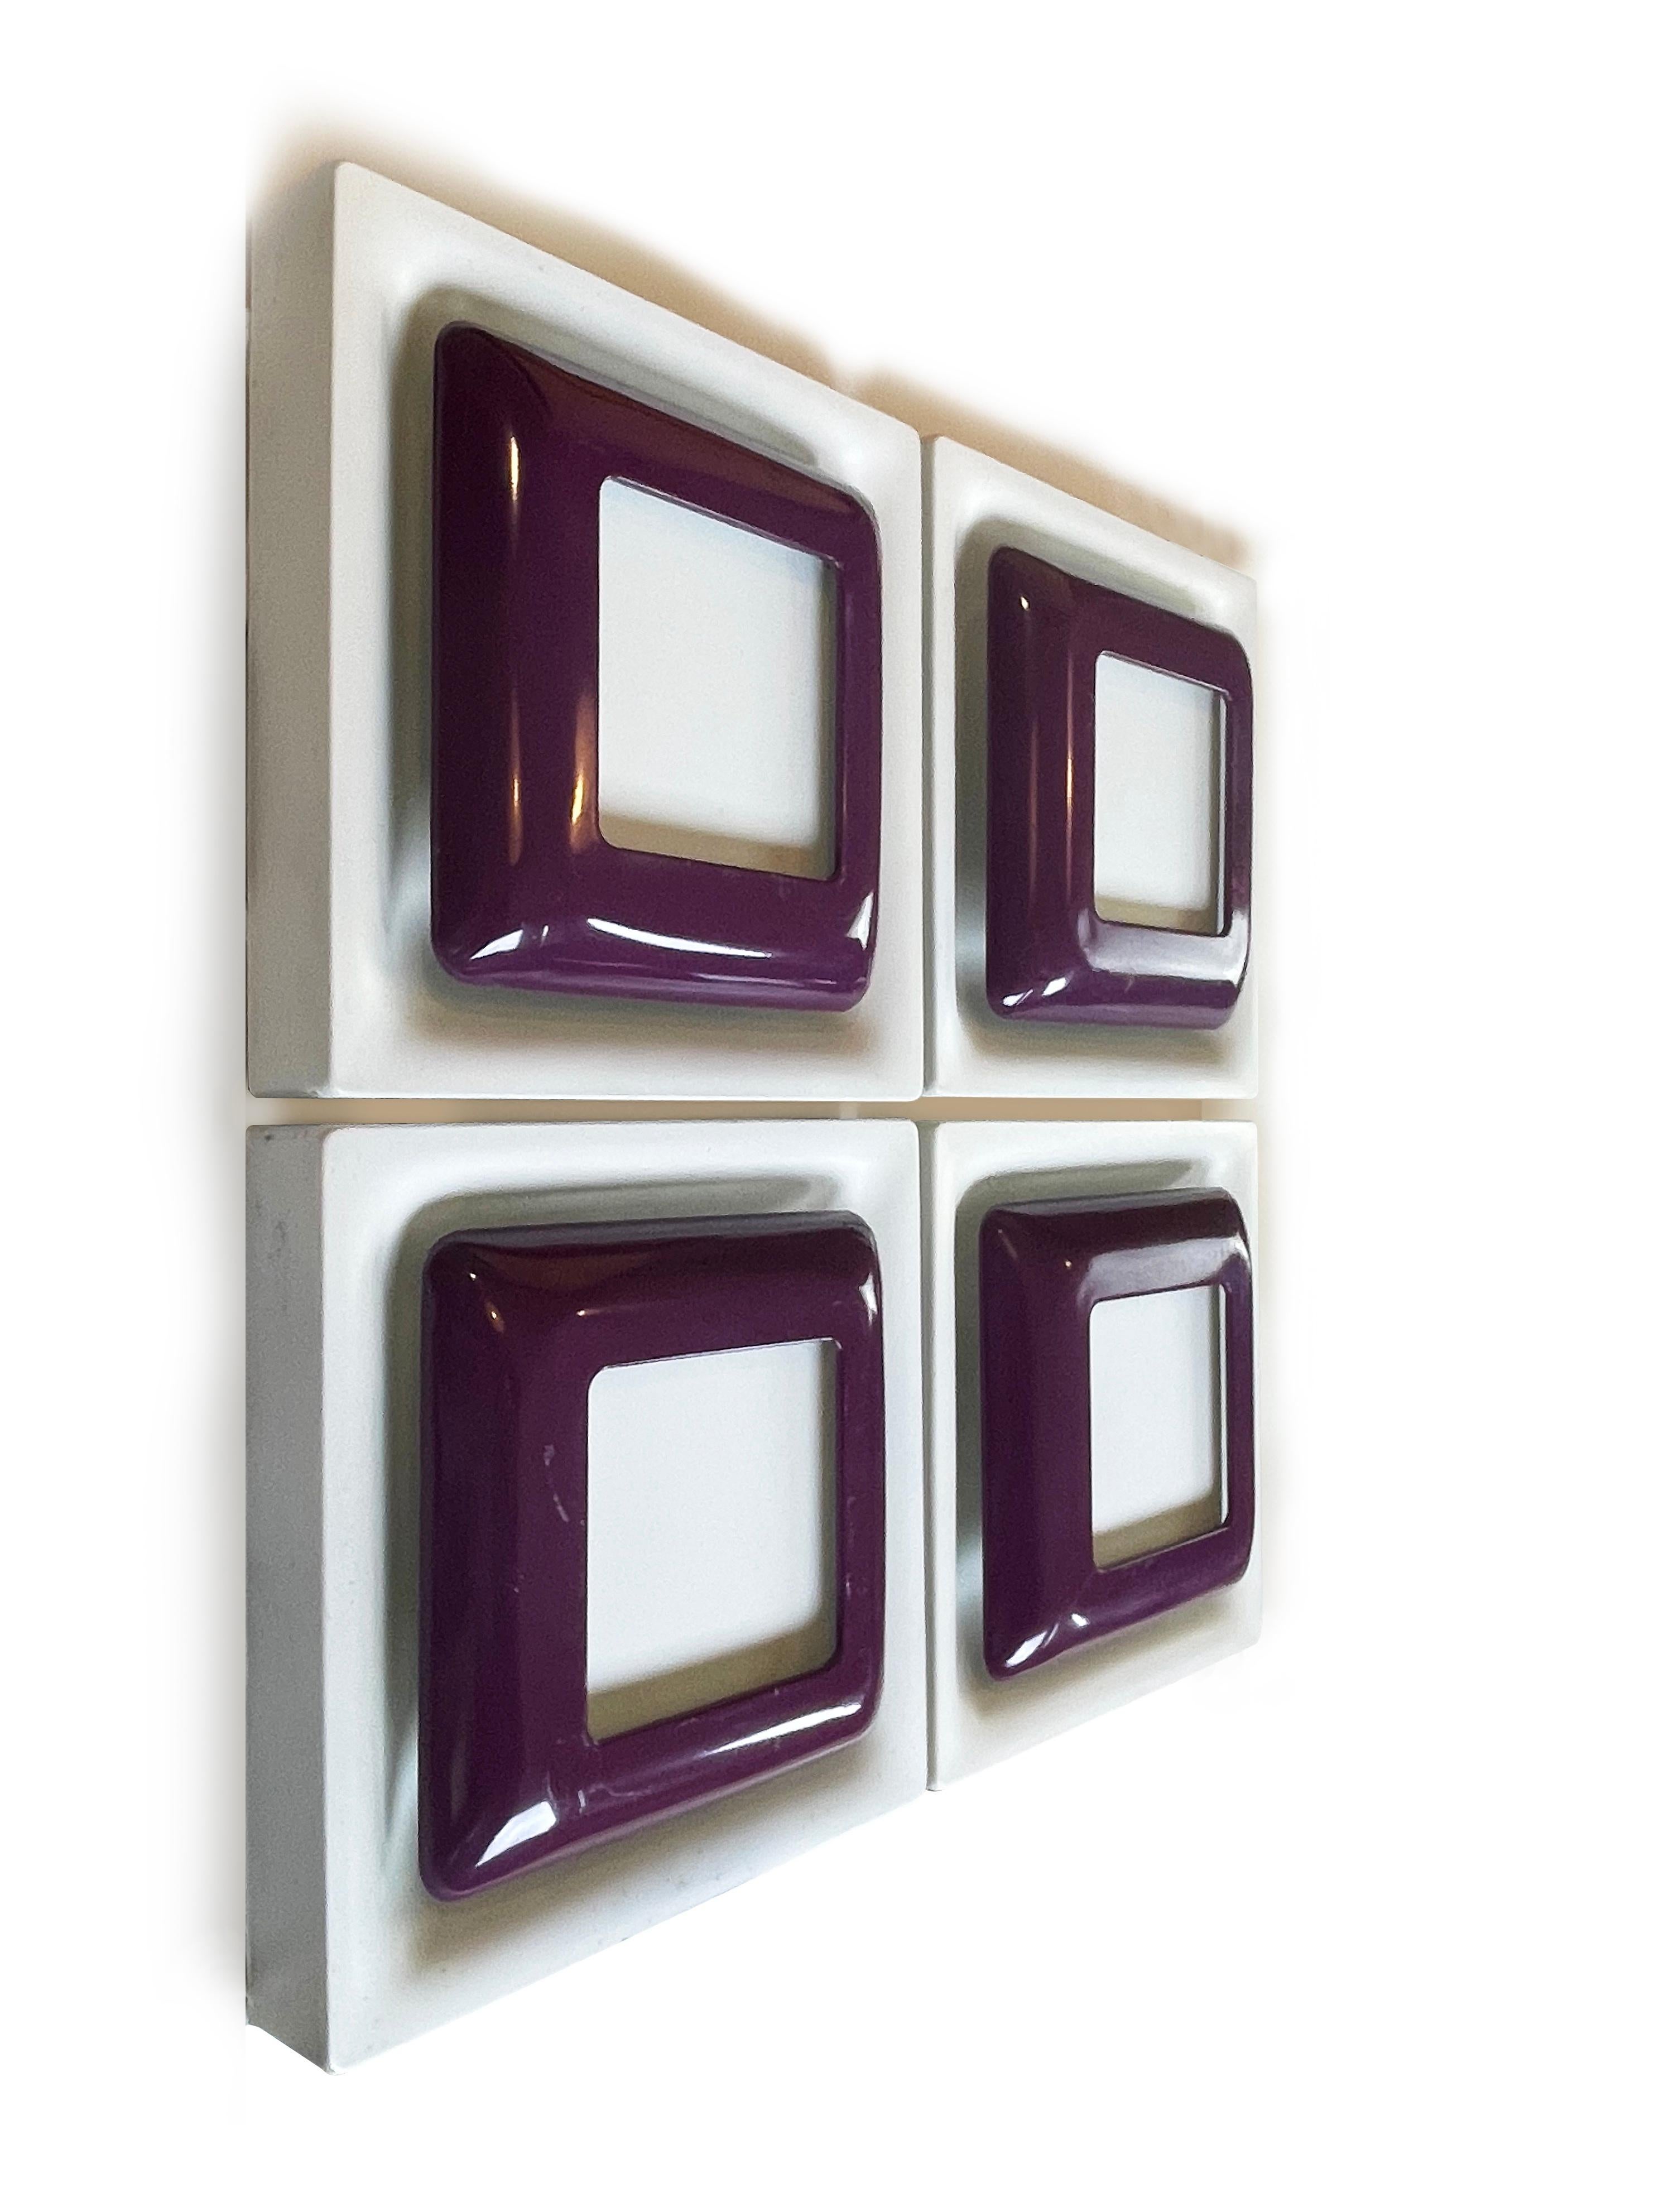 Machine-Made 4 Op Art Wall Sconces Square Lamps White & Purple Metal by Doria, Germany 1970s For Sale